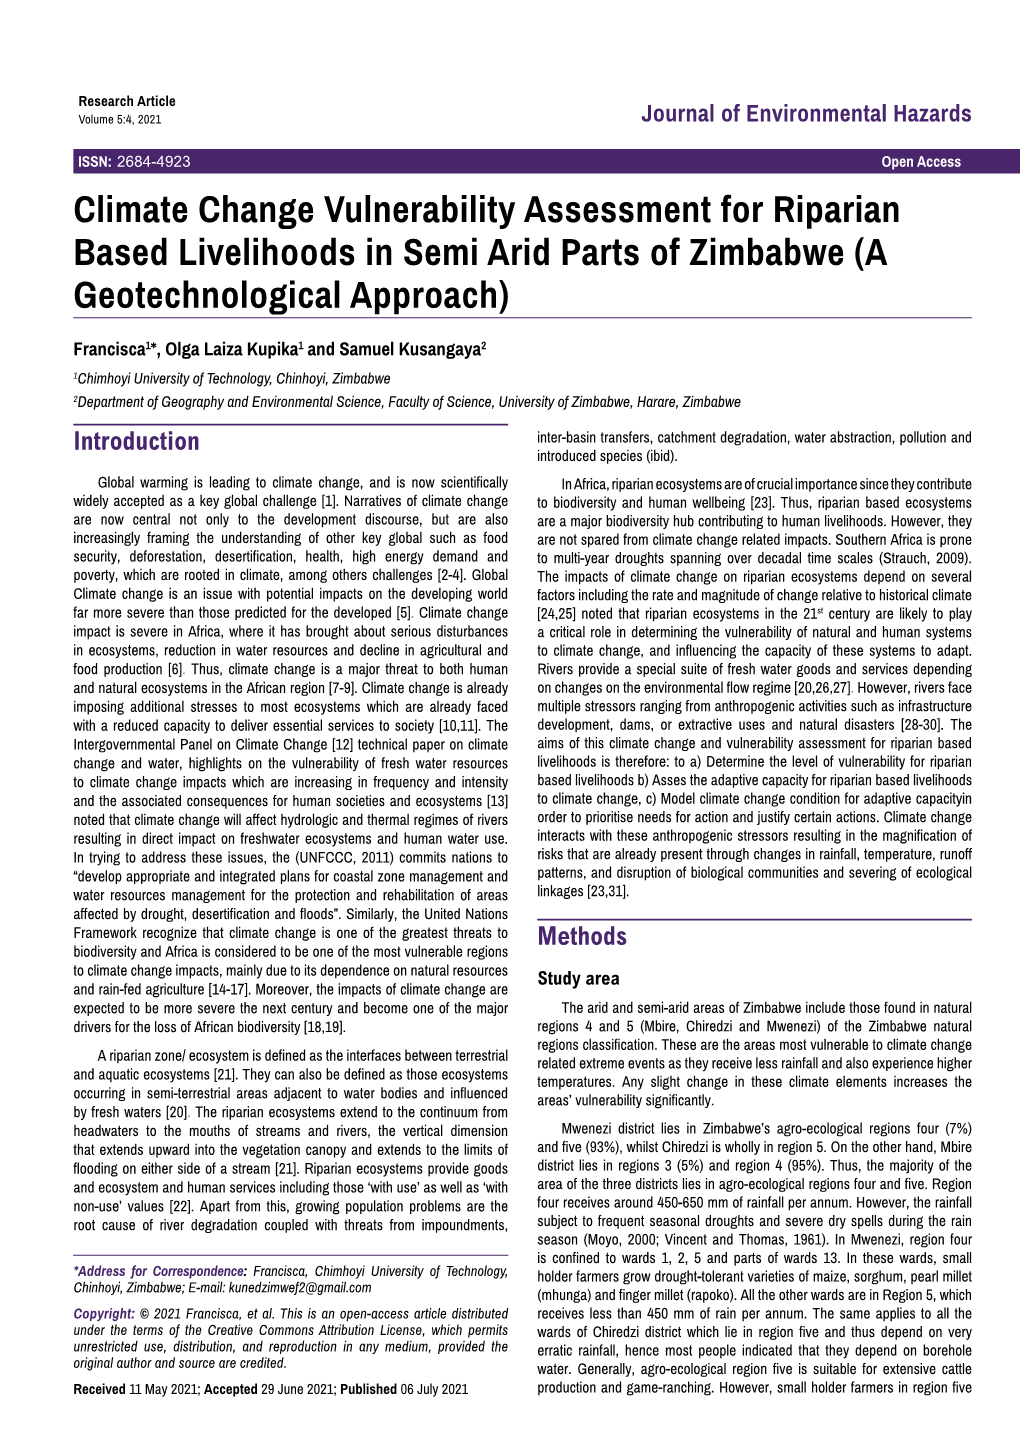 Climate Change Vulnerability Assessment for Riparian Based Livelihoods in Semi Arid Parts of Zimbabwe (A Geotechnological Approach)